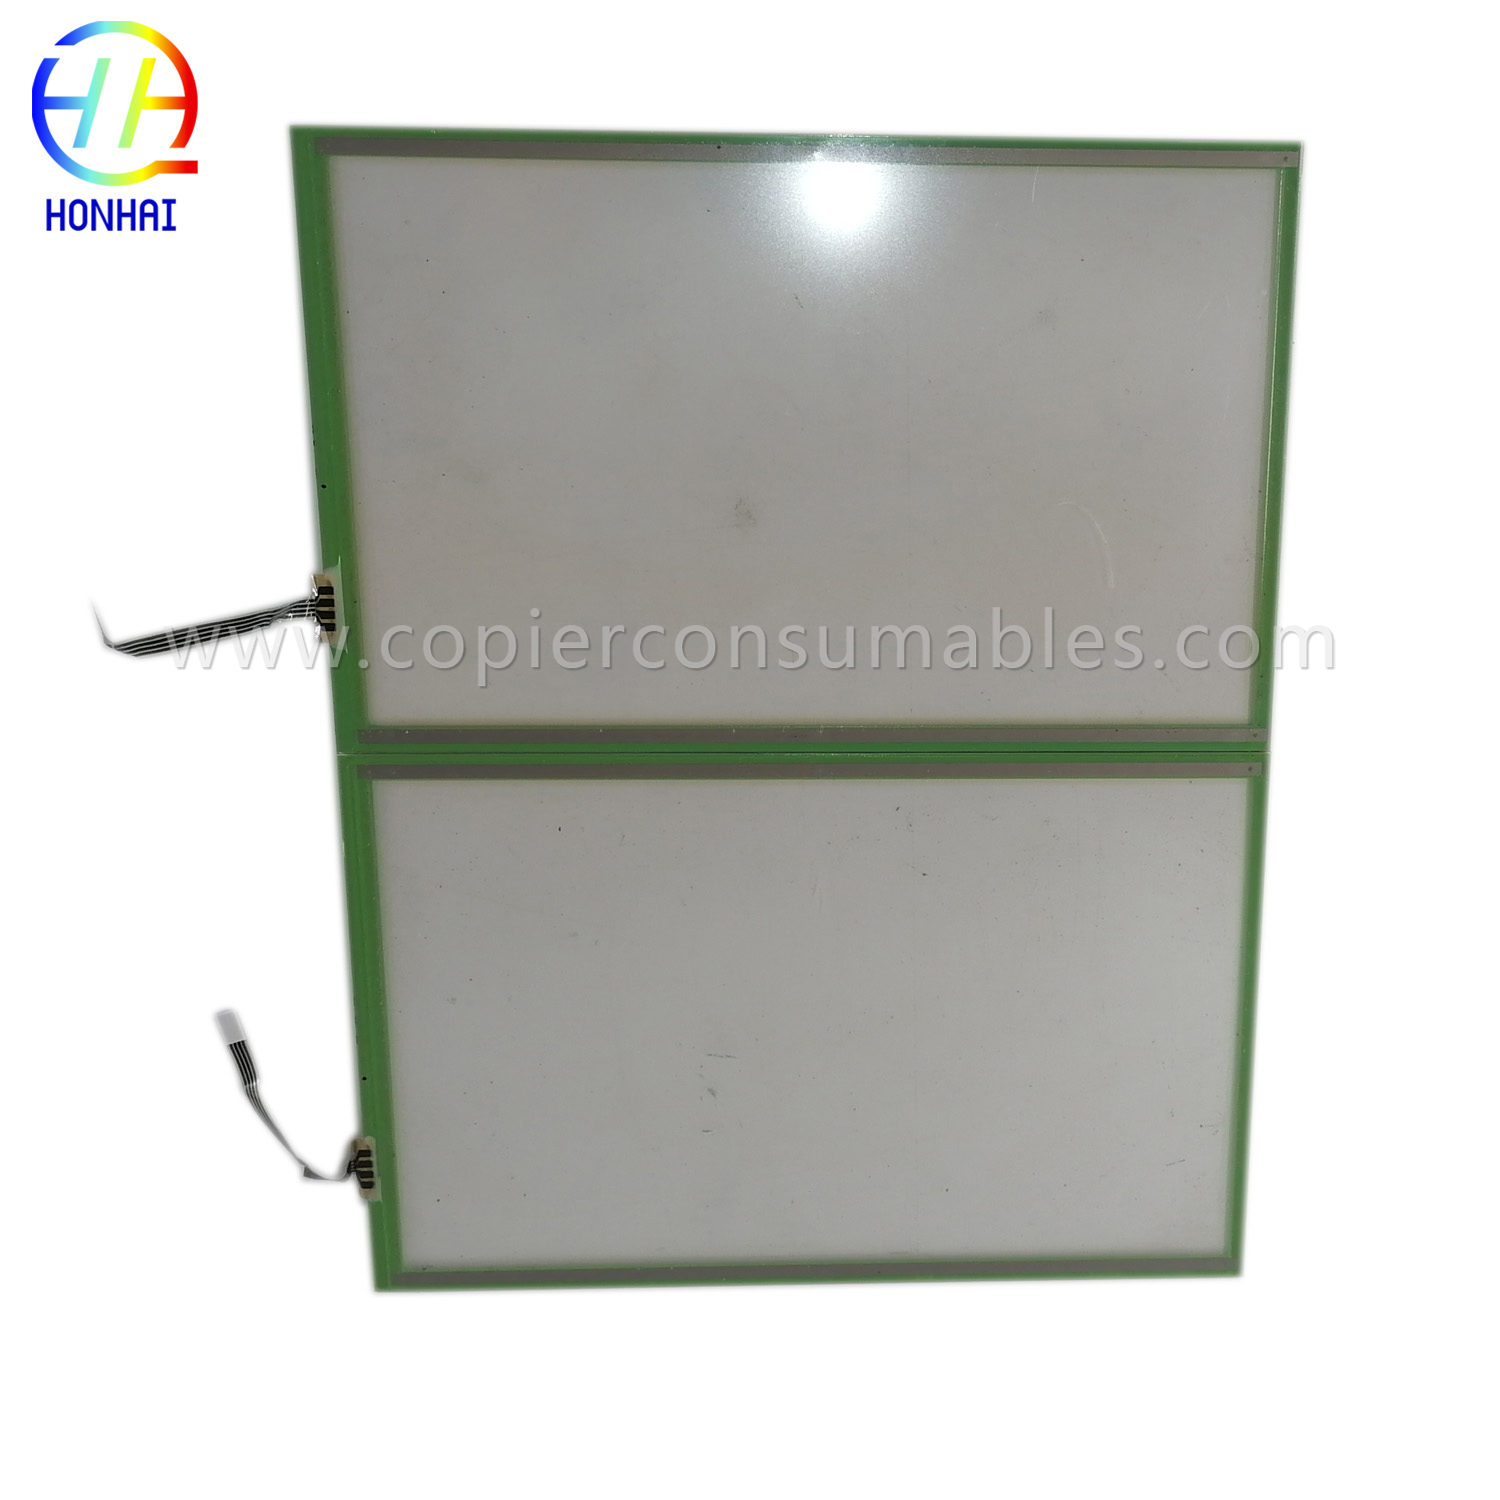 Touch panel for Ricoh MP 4000B 5000B 4001 5001 4002 5002 4000 1035 1045 3010 3035 3045(5).jpg-1 拷贝